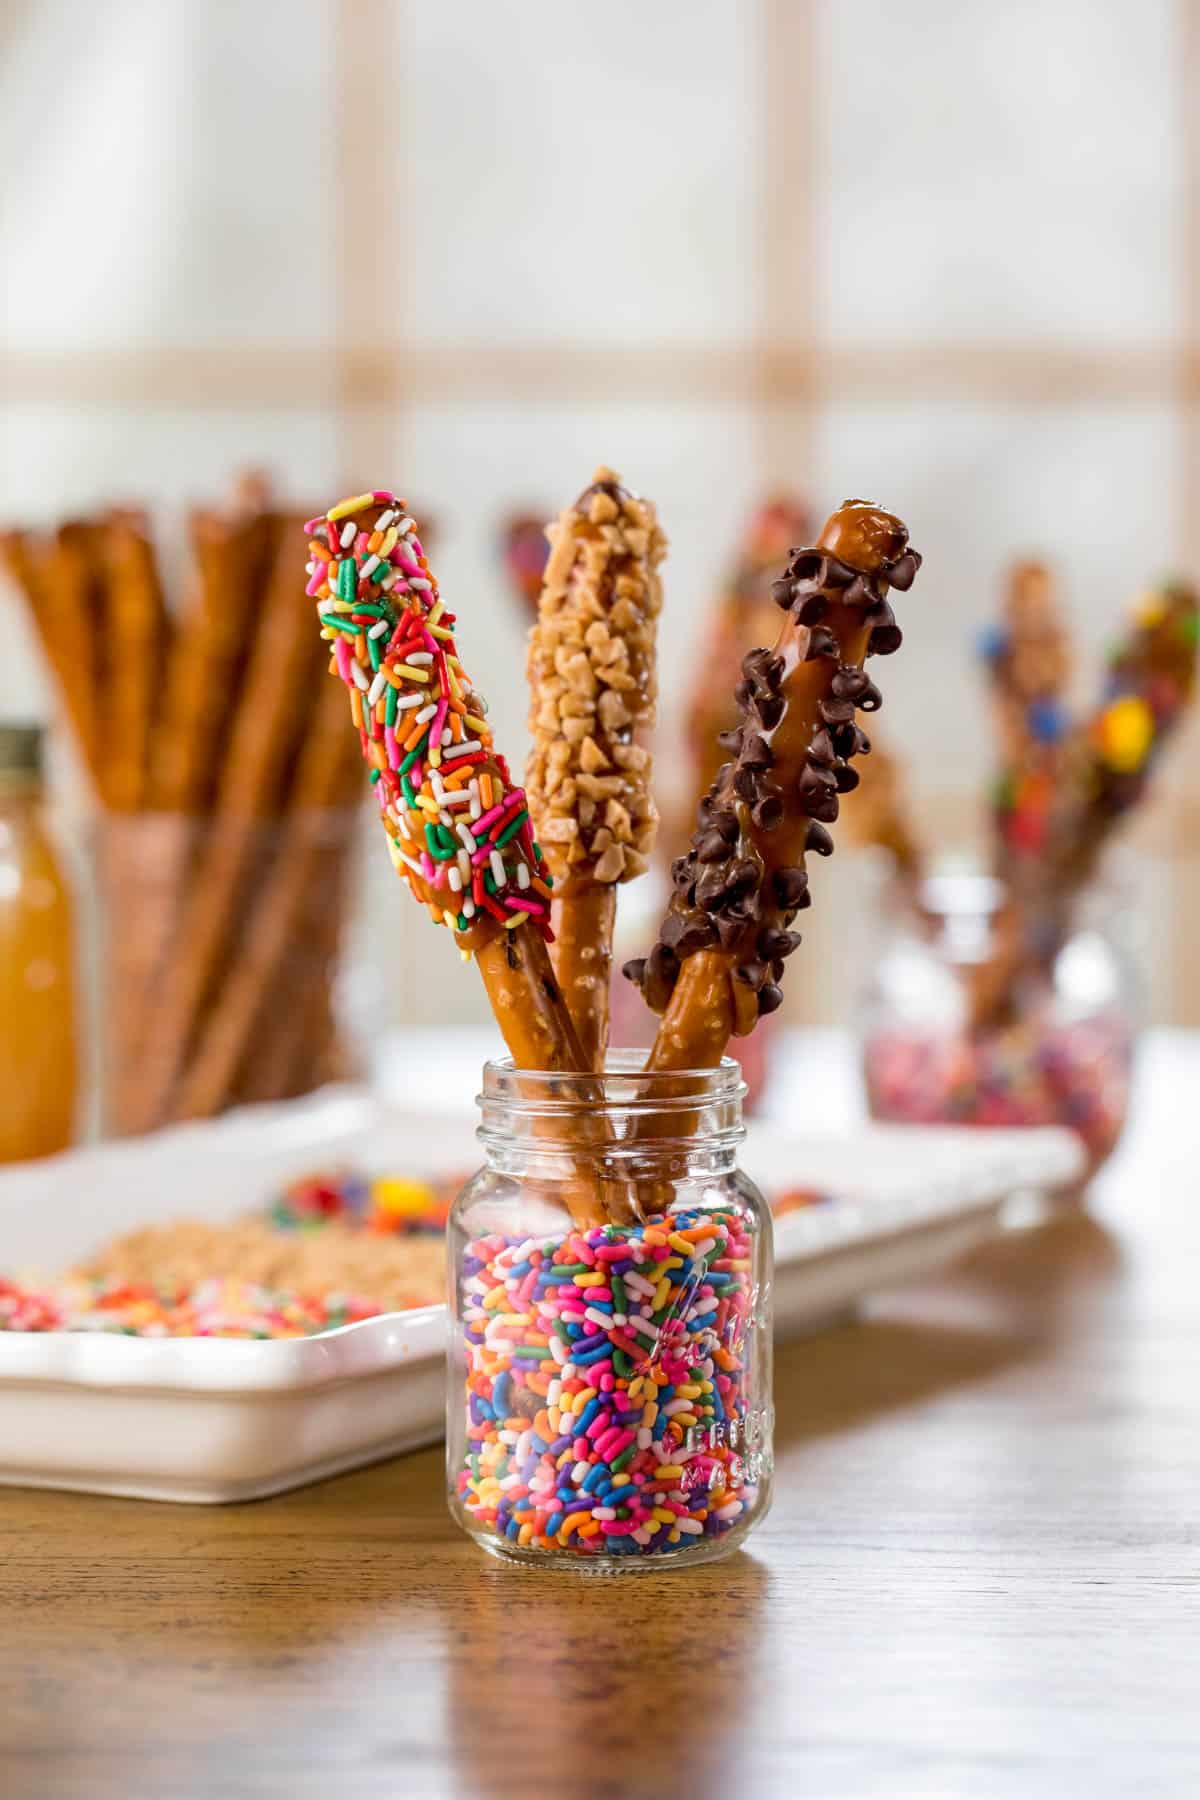 3 pretzel rods dipped in caramel and various toppings standing up in a glass jar with sprinkles